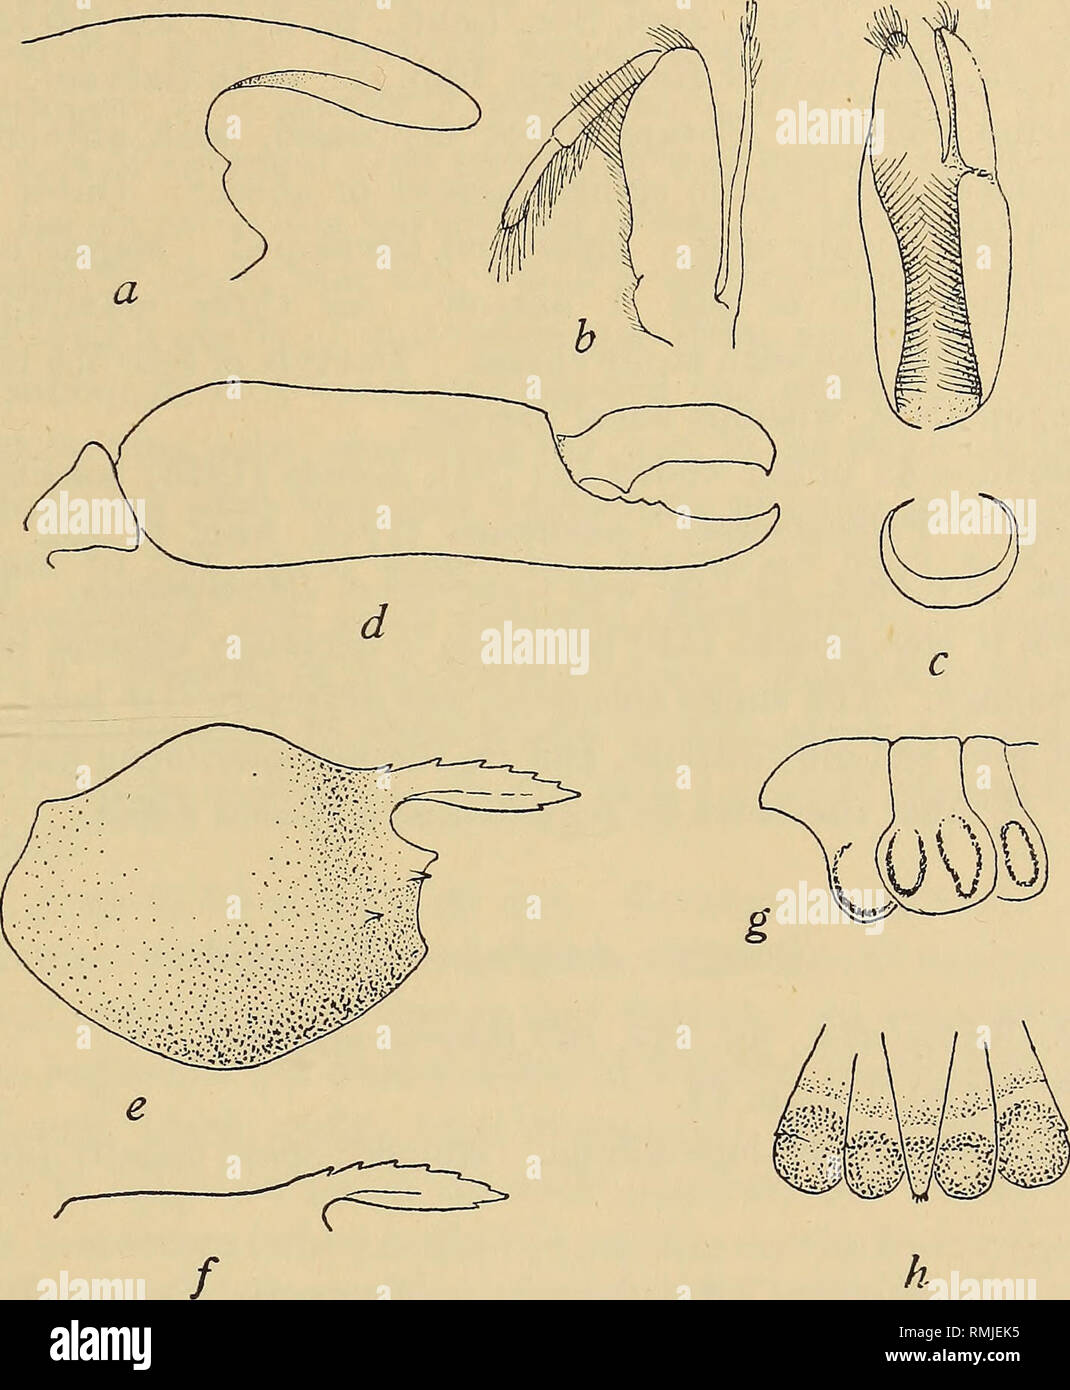 . Annals of the South African Museum = Annale van die Suid-Afrikaanse Museum. Natural history. Descriptive Catalogue of South African Decapod Crustacea. 793 robust. Dactyls of 3rd-5th legs strongly hooked, simple, basal width about half the distal width of 6th joint. Length up to 25 mm. (Kemp: one ? 39 mm.). Pale translucent buff, yellowish or pink, the colour formed by numerous stellate specks. Fig. 150.—Anchistus inermis (Miers). a, rostrum, b, mxp. 3. c, chela of 1st leg, with cross-section through palm, d, 2nd leg, larger chela. Periclimenes (Ancylocaris) brevicarpalis (Schenkel). e, carap Stock Photo